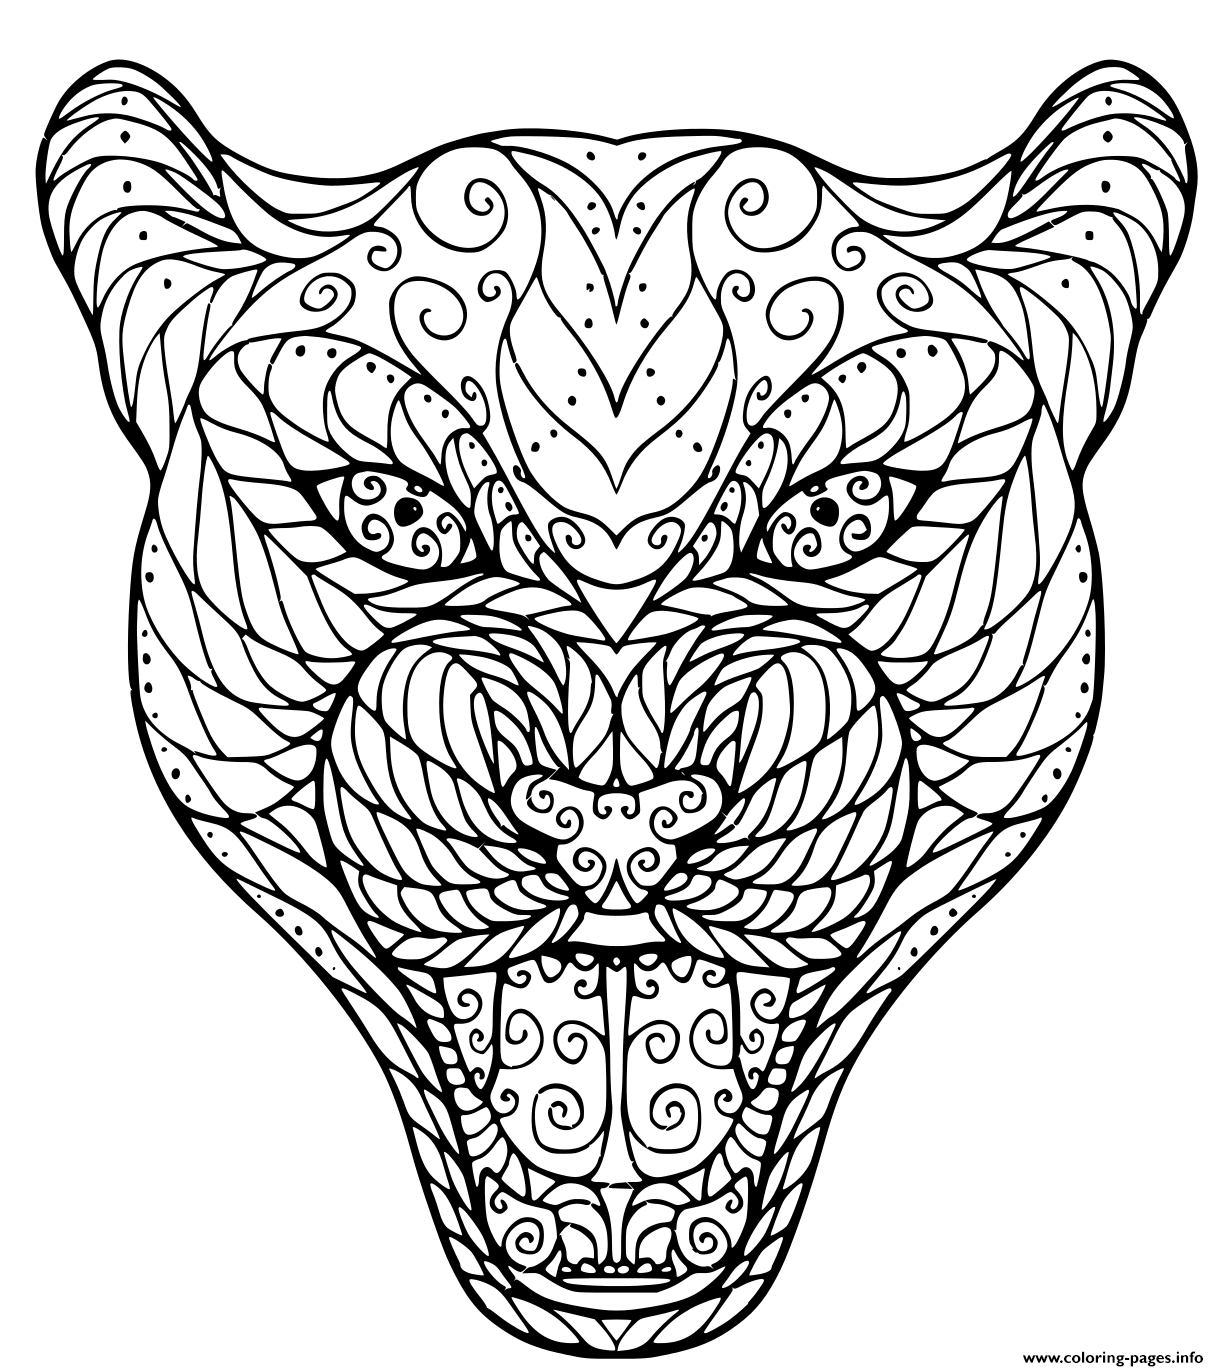 Zen Tangle Head Of Leopard For Adult coloring pages